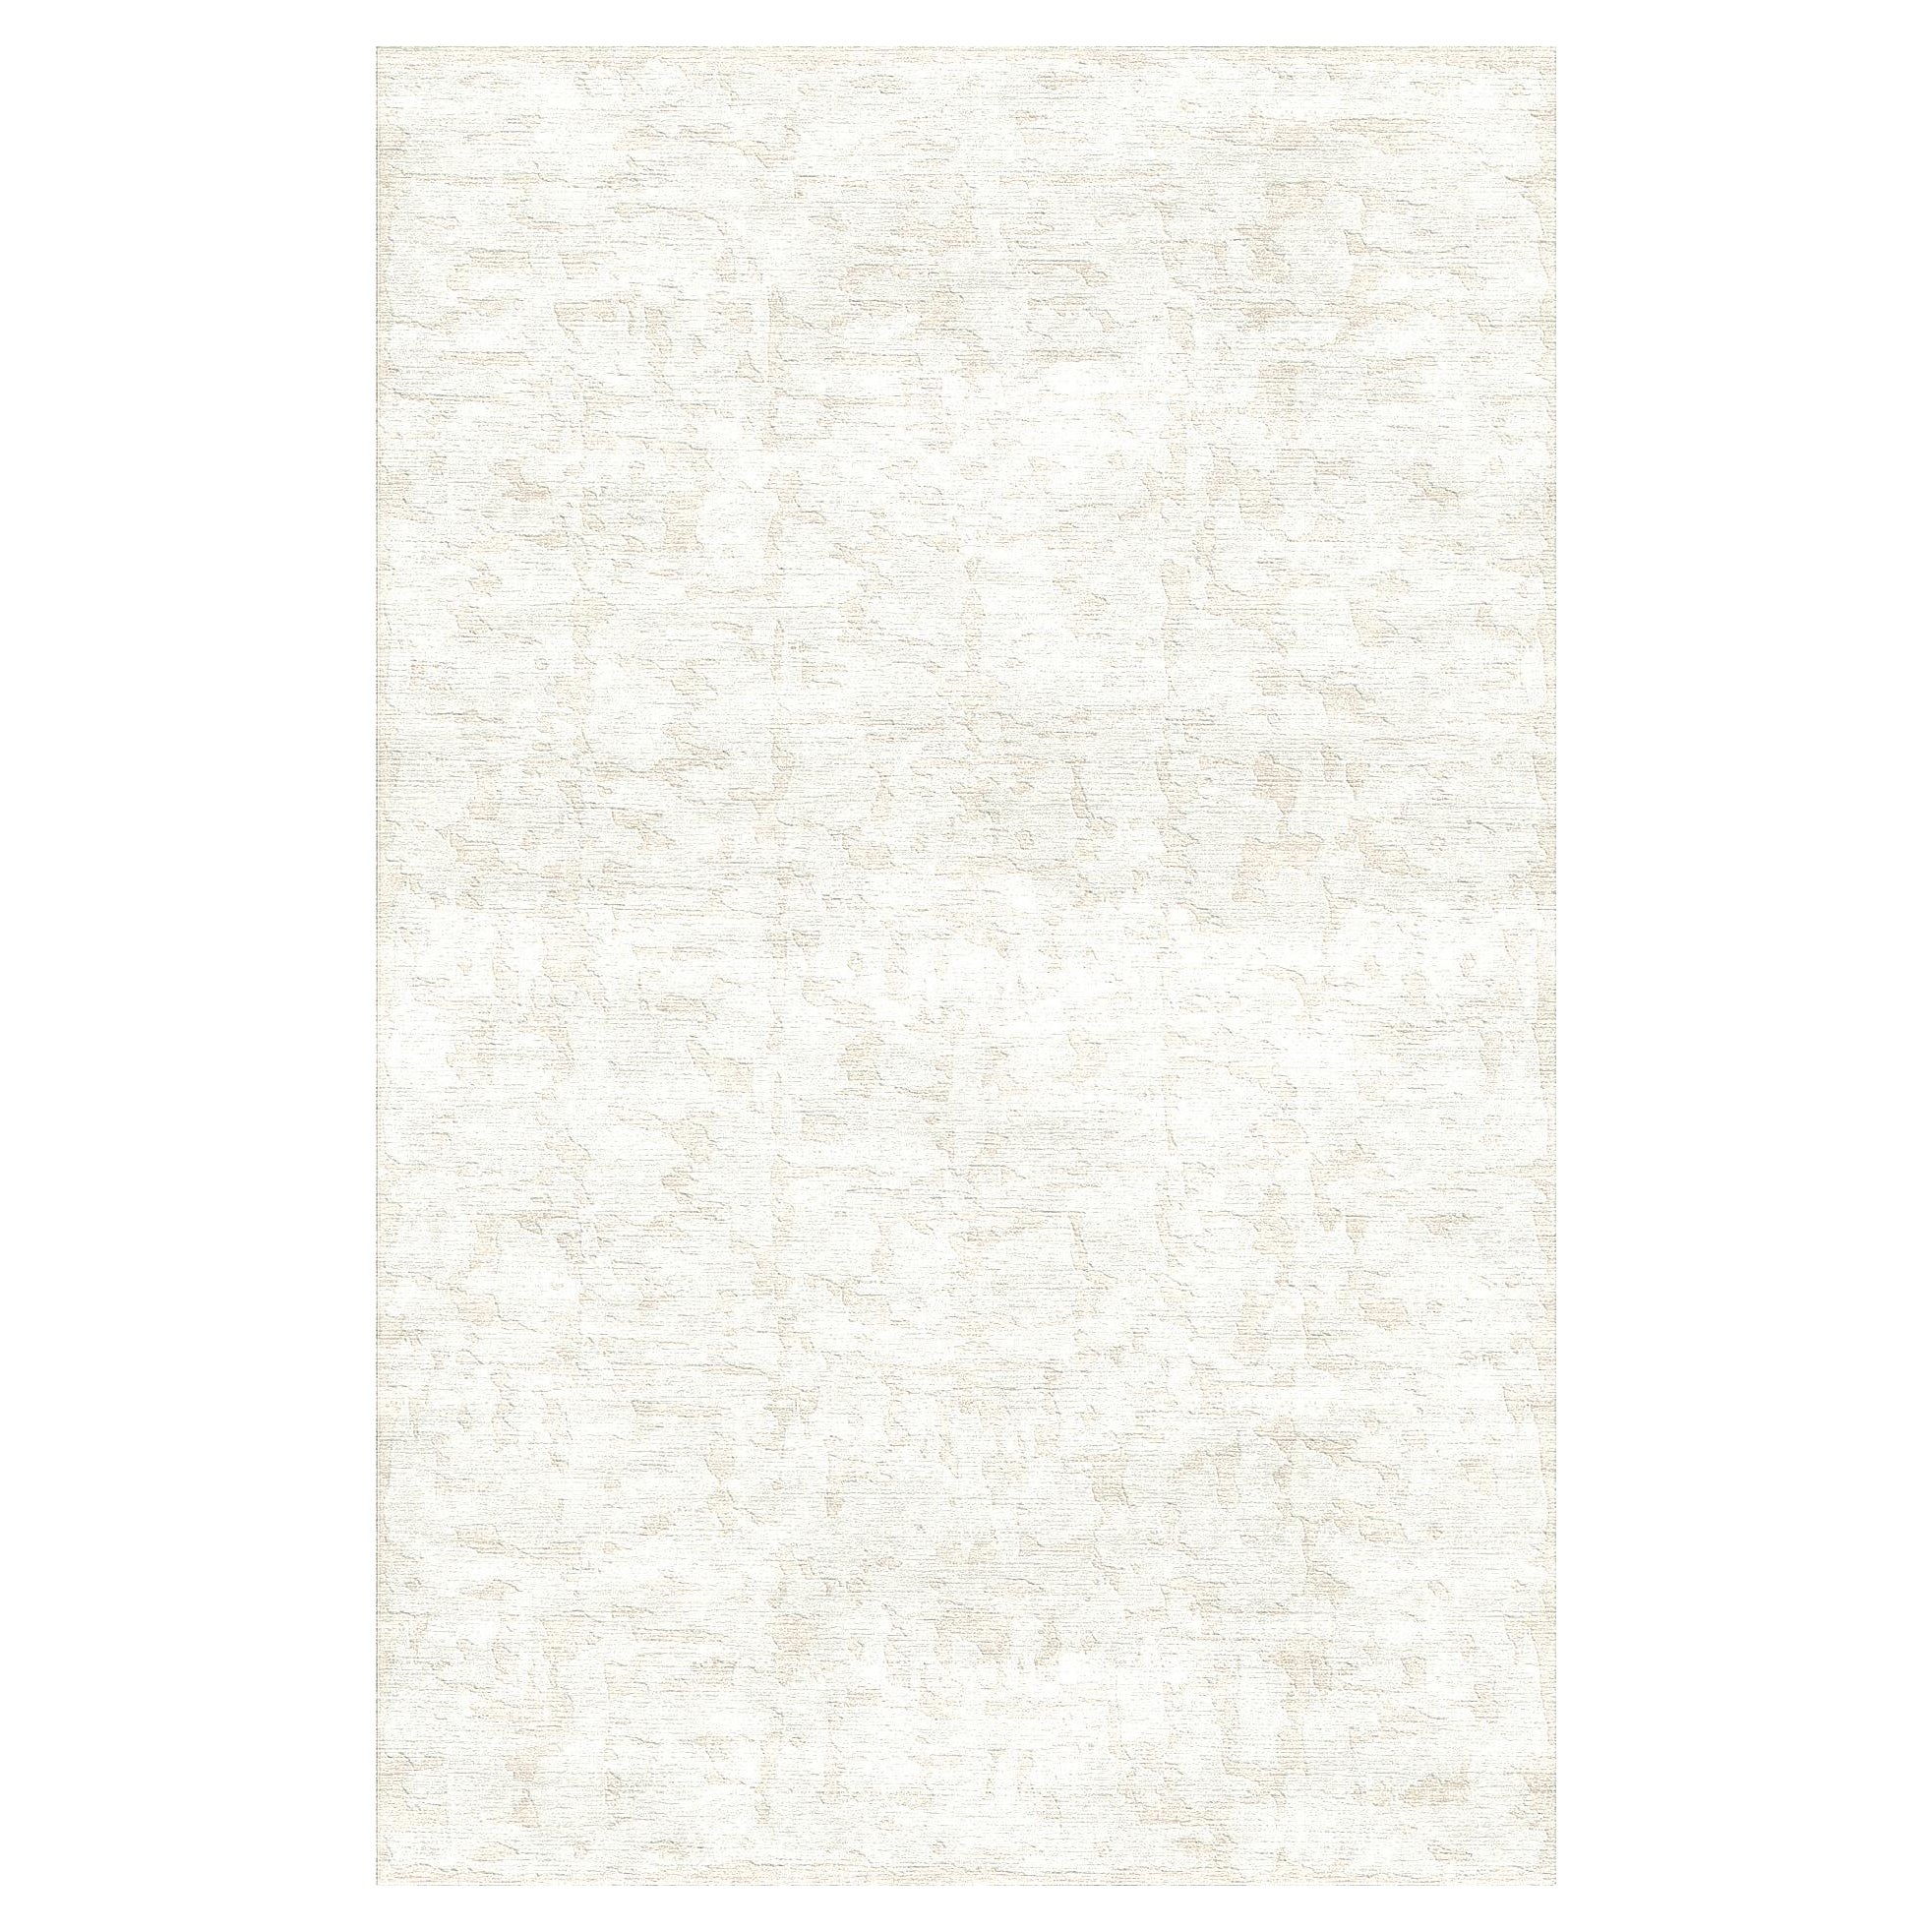 Contemporary Area Rug in White Handmade of 100% Wool "Rio" Large For Sale